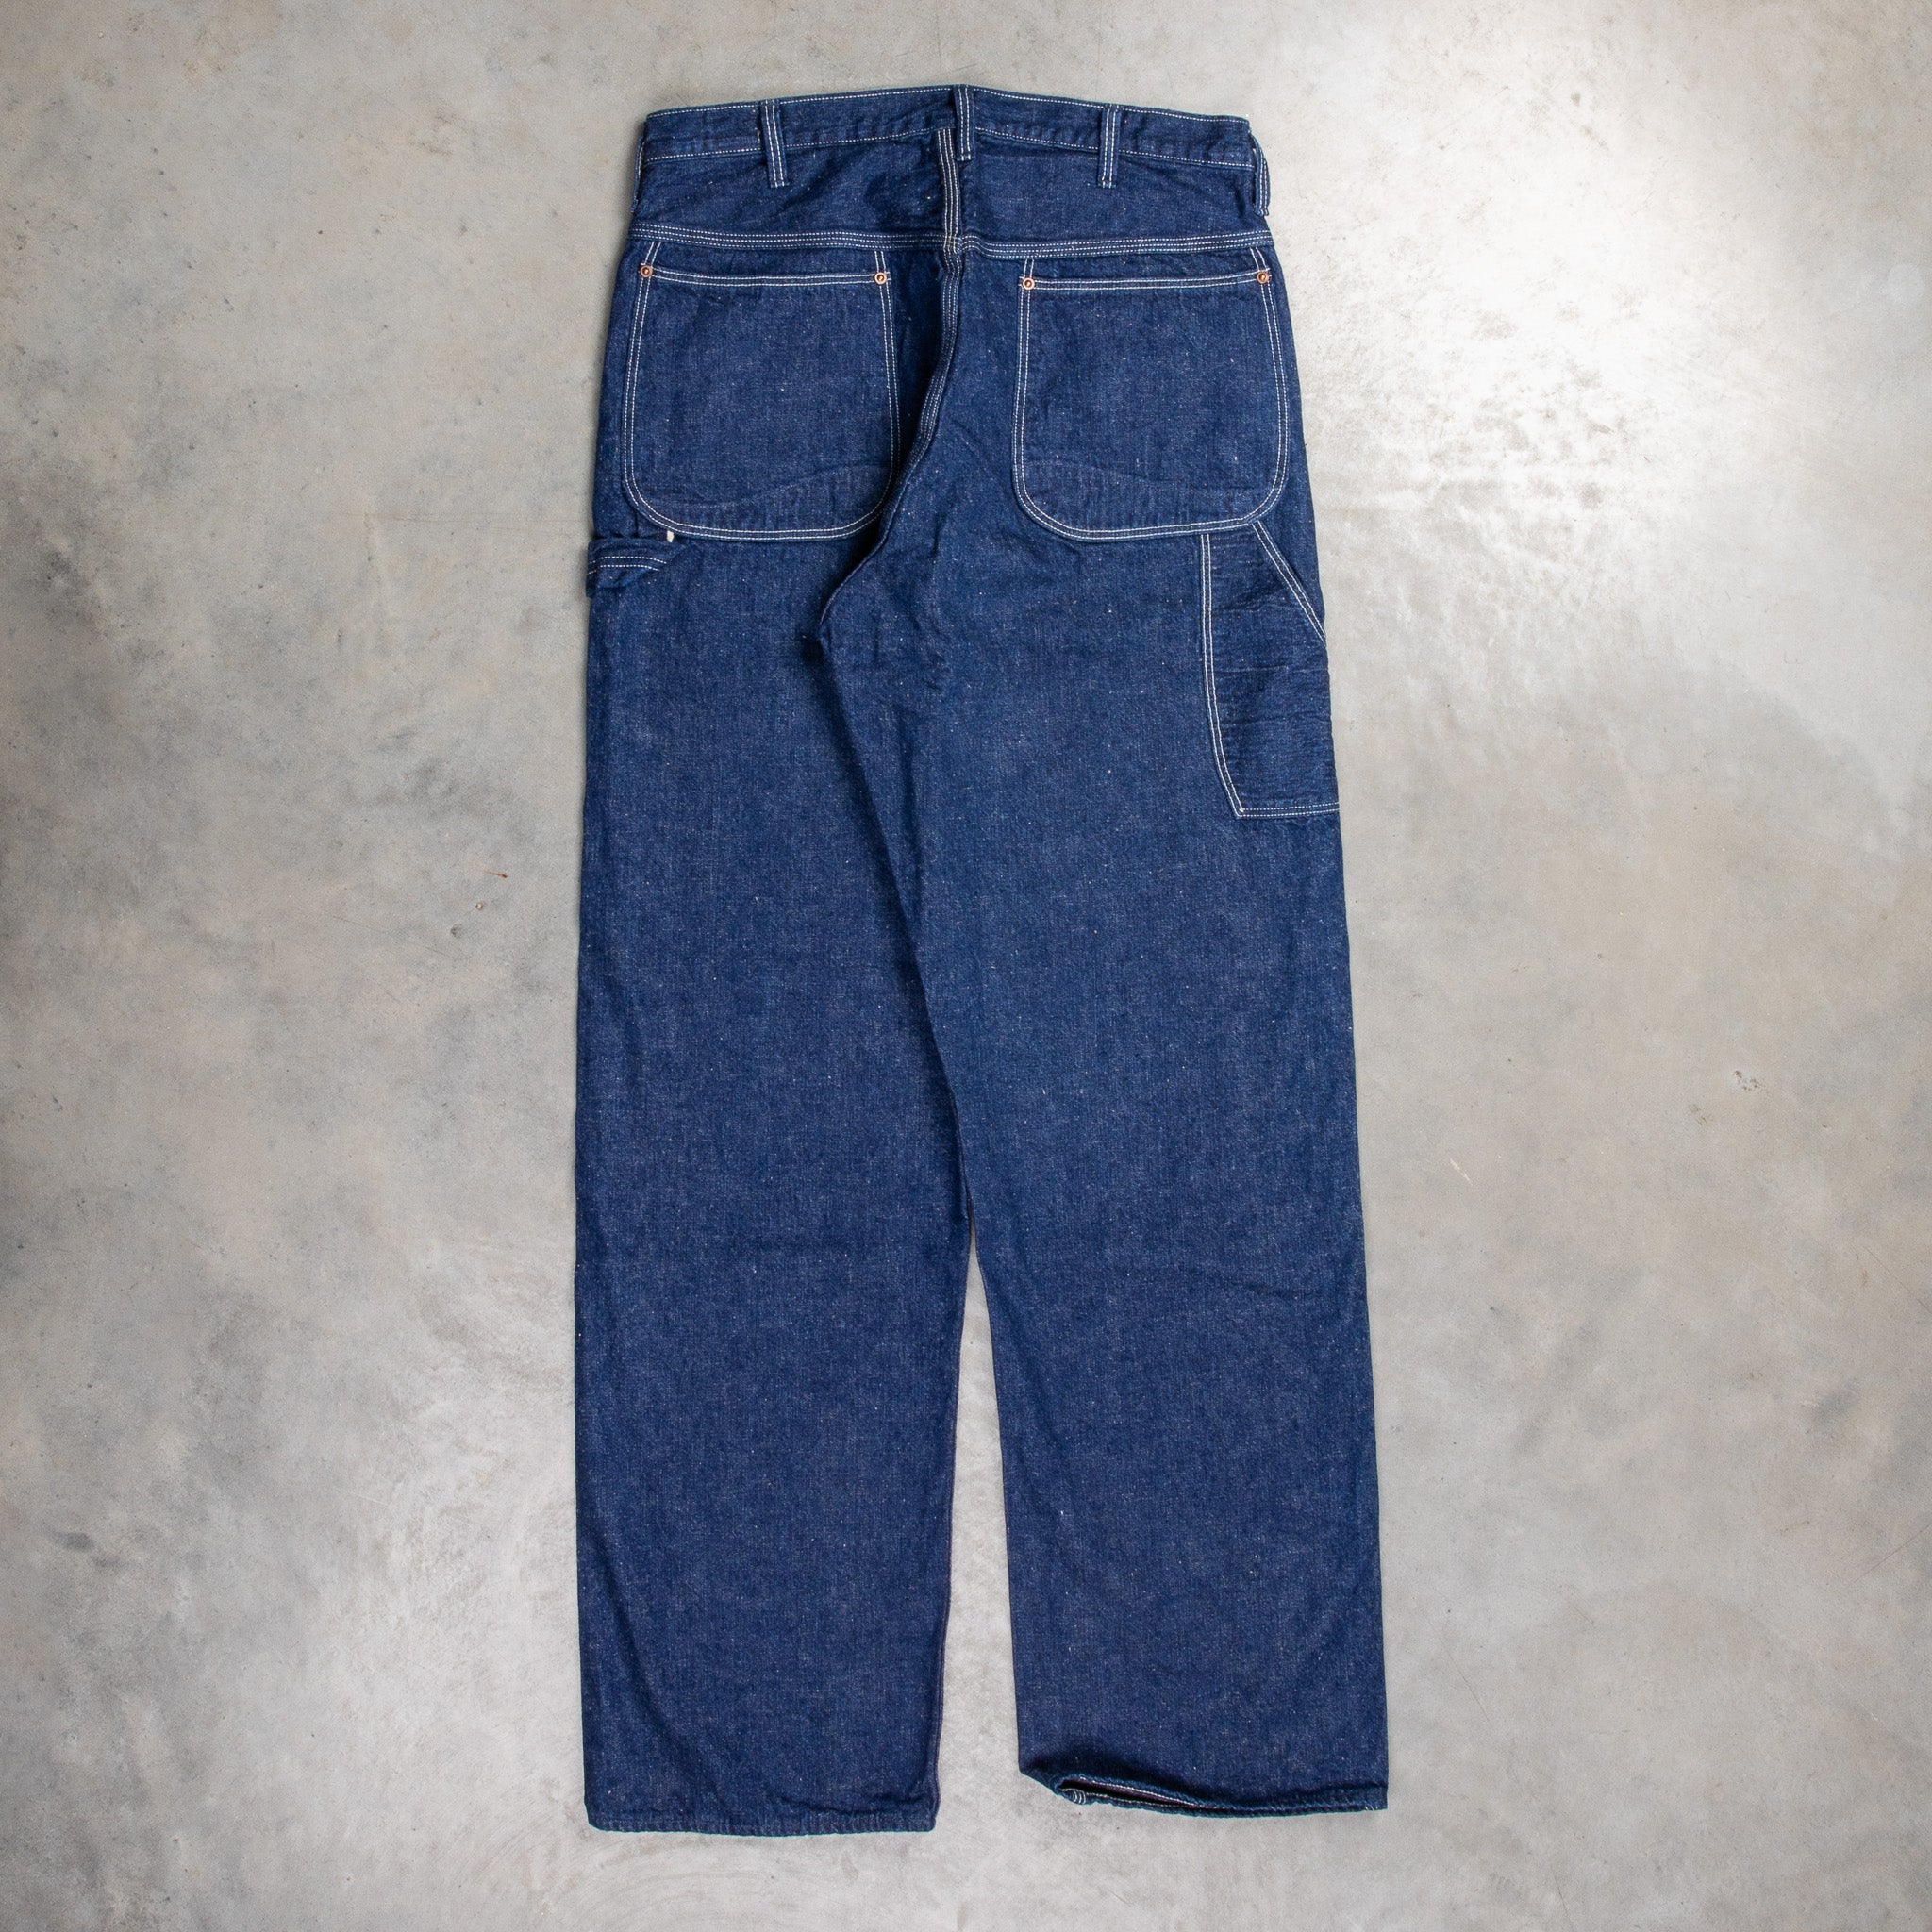 Orslow Painter Pants One wash